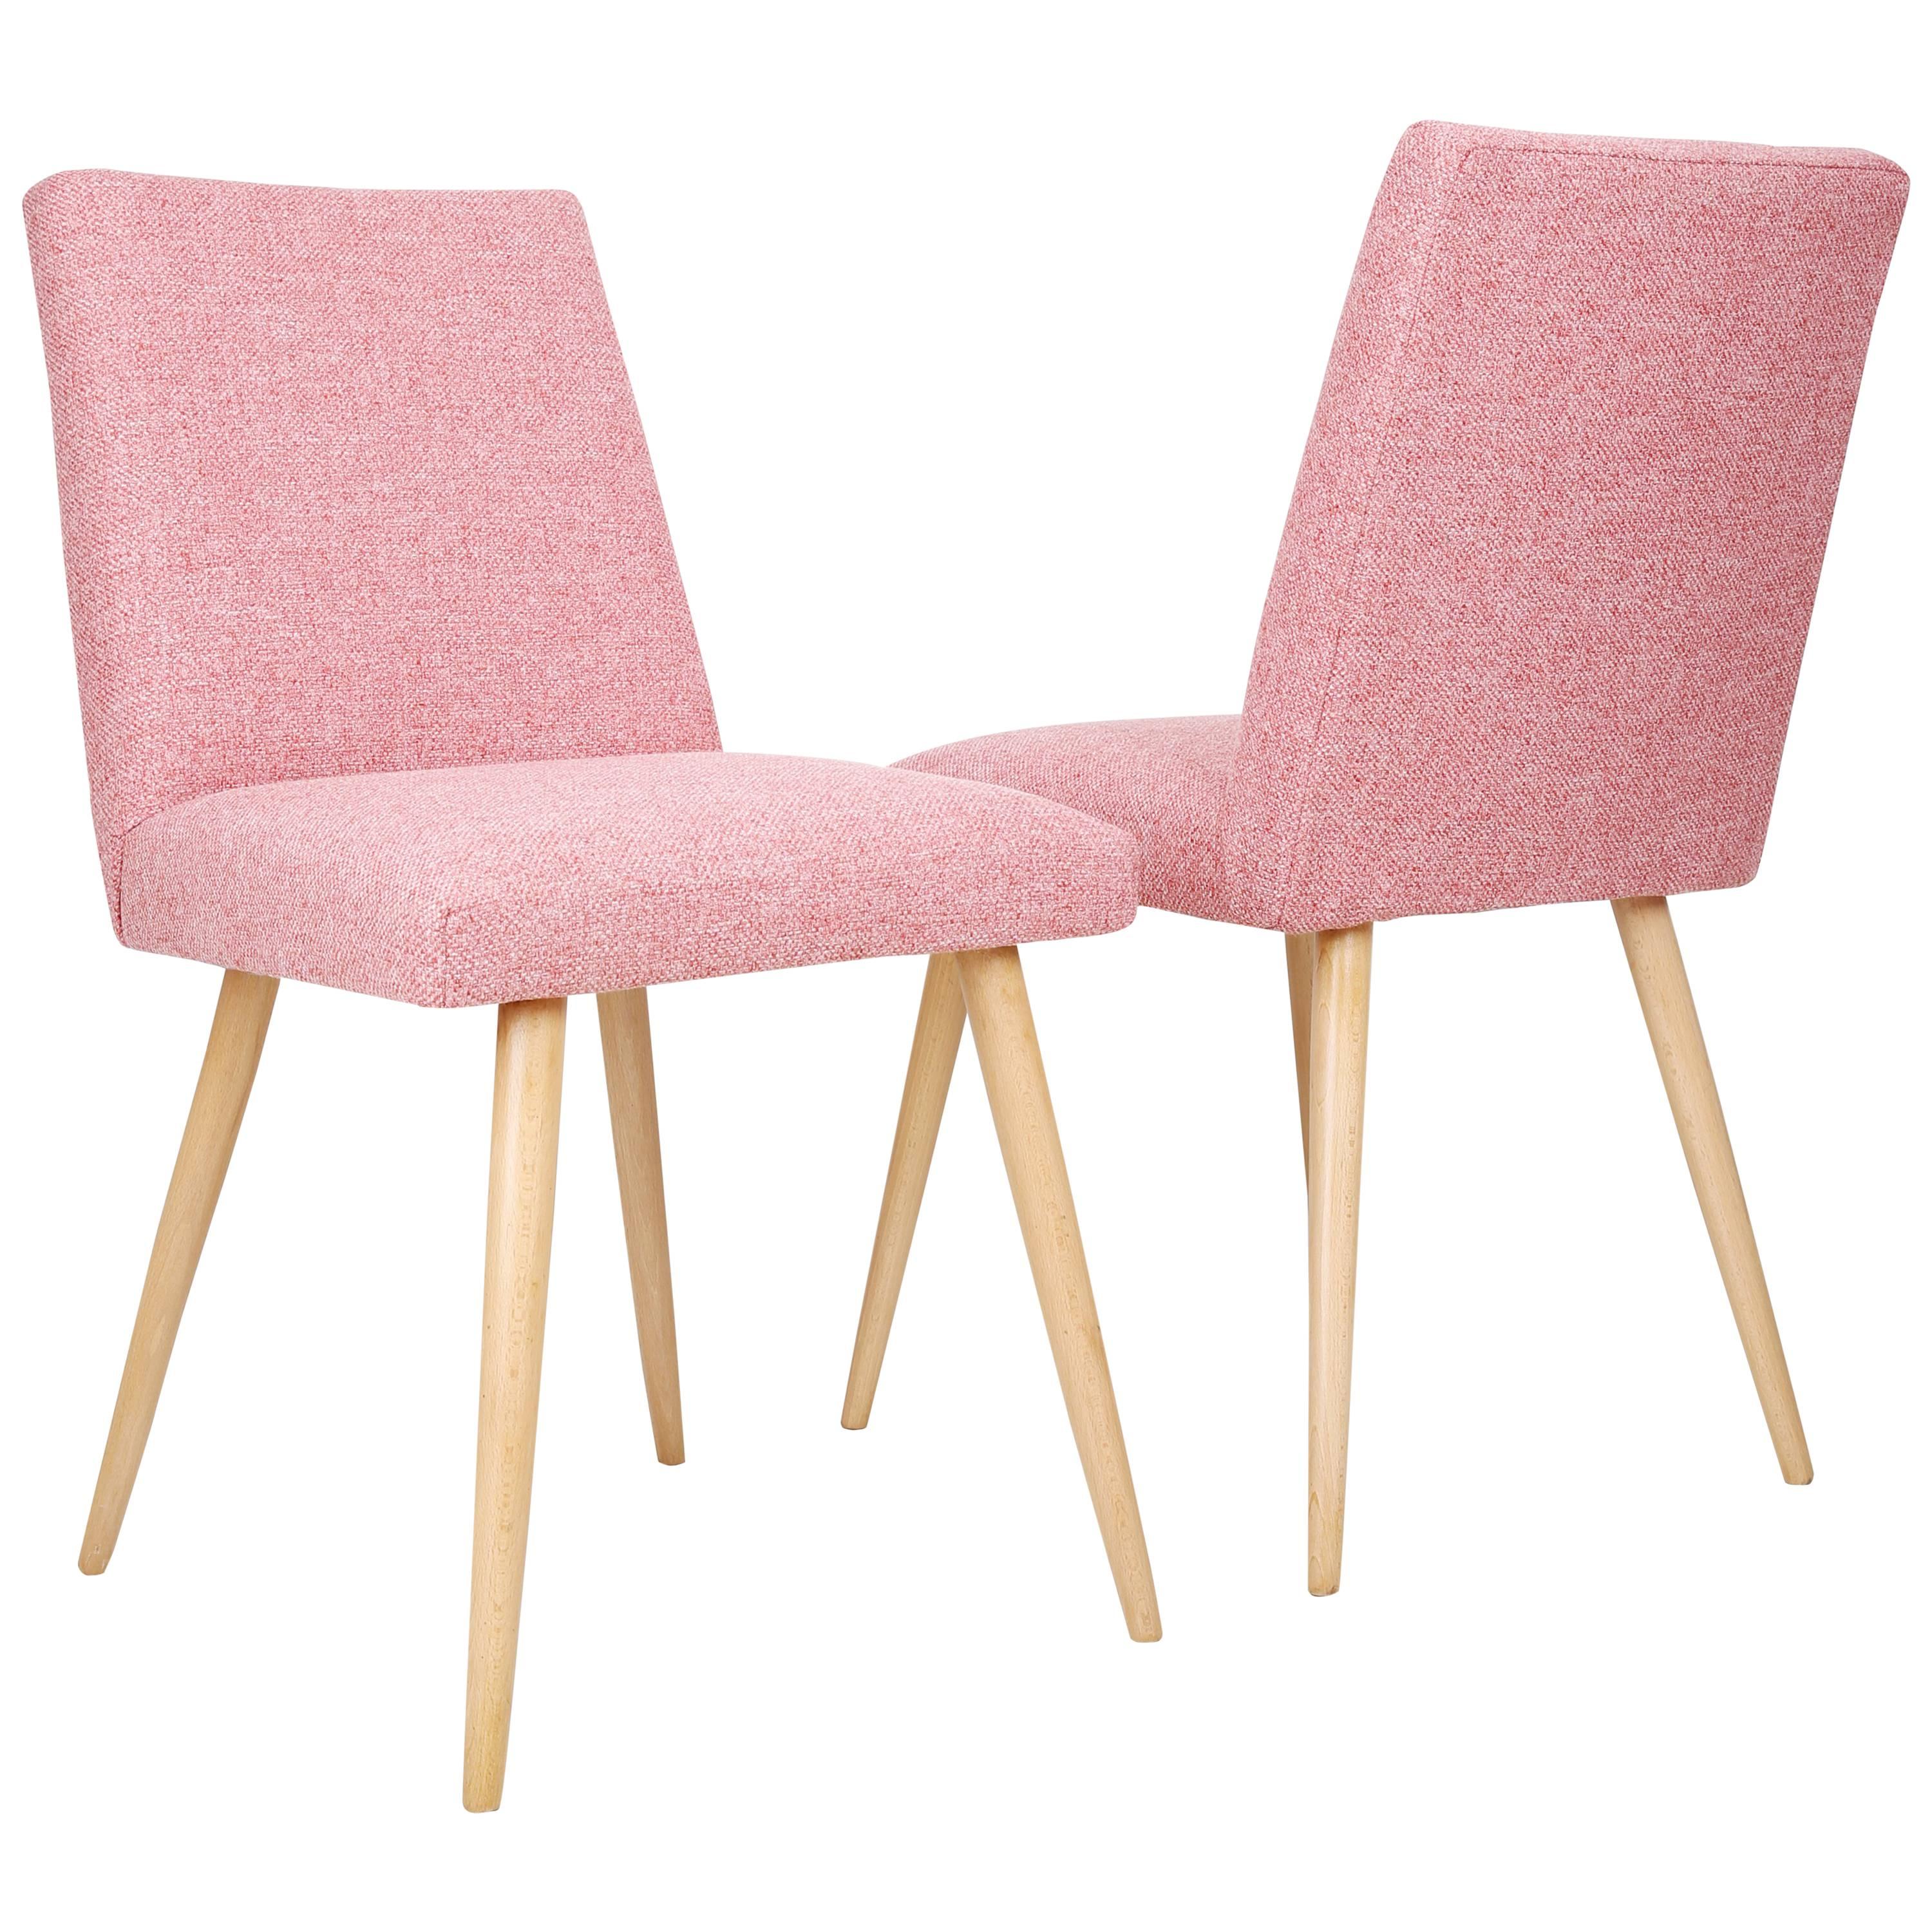 Pair of Two Mid Century Baby Pink Chairs, 1960s, Poland